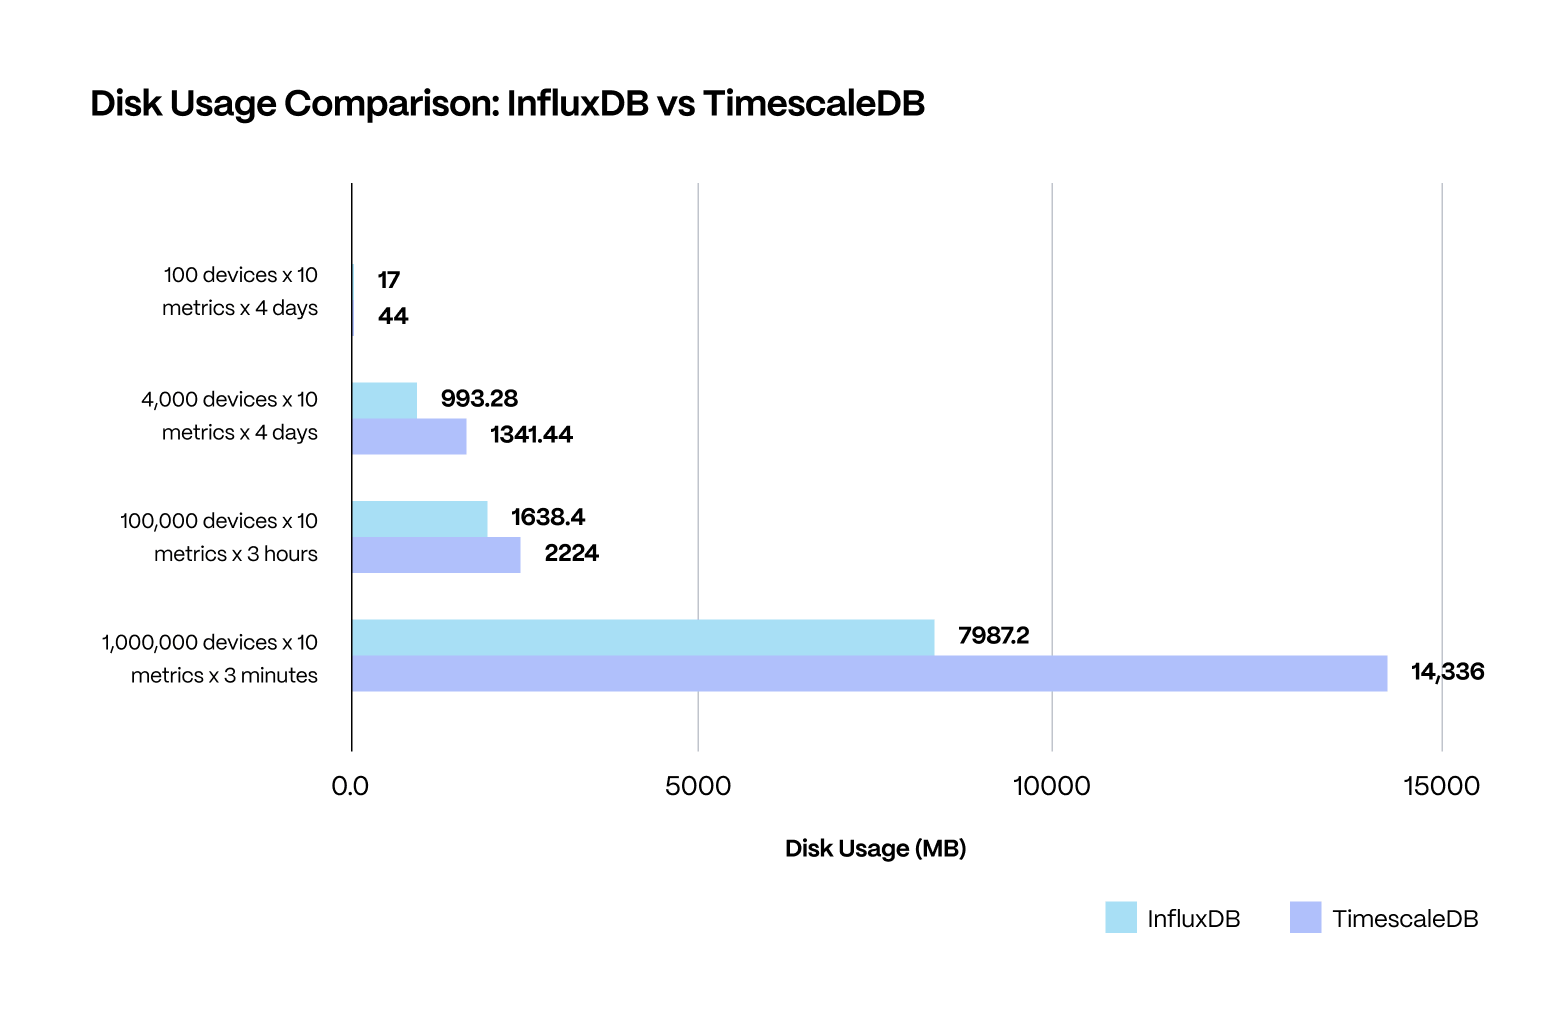 Chart comparing disk usage between InfluxDB and TimescaleDB